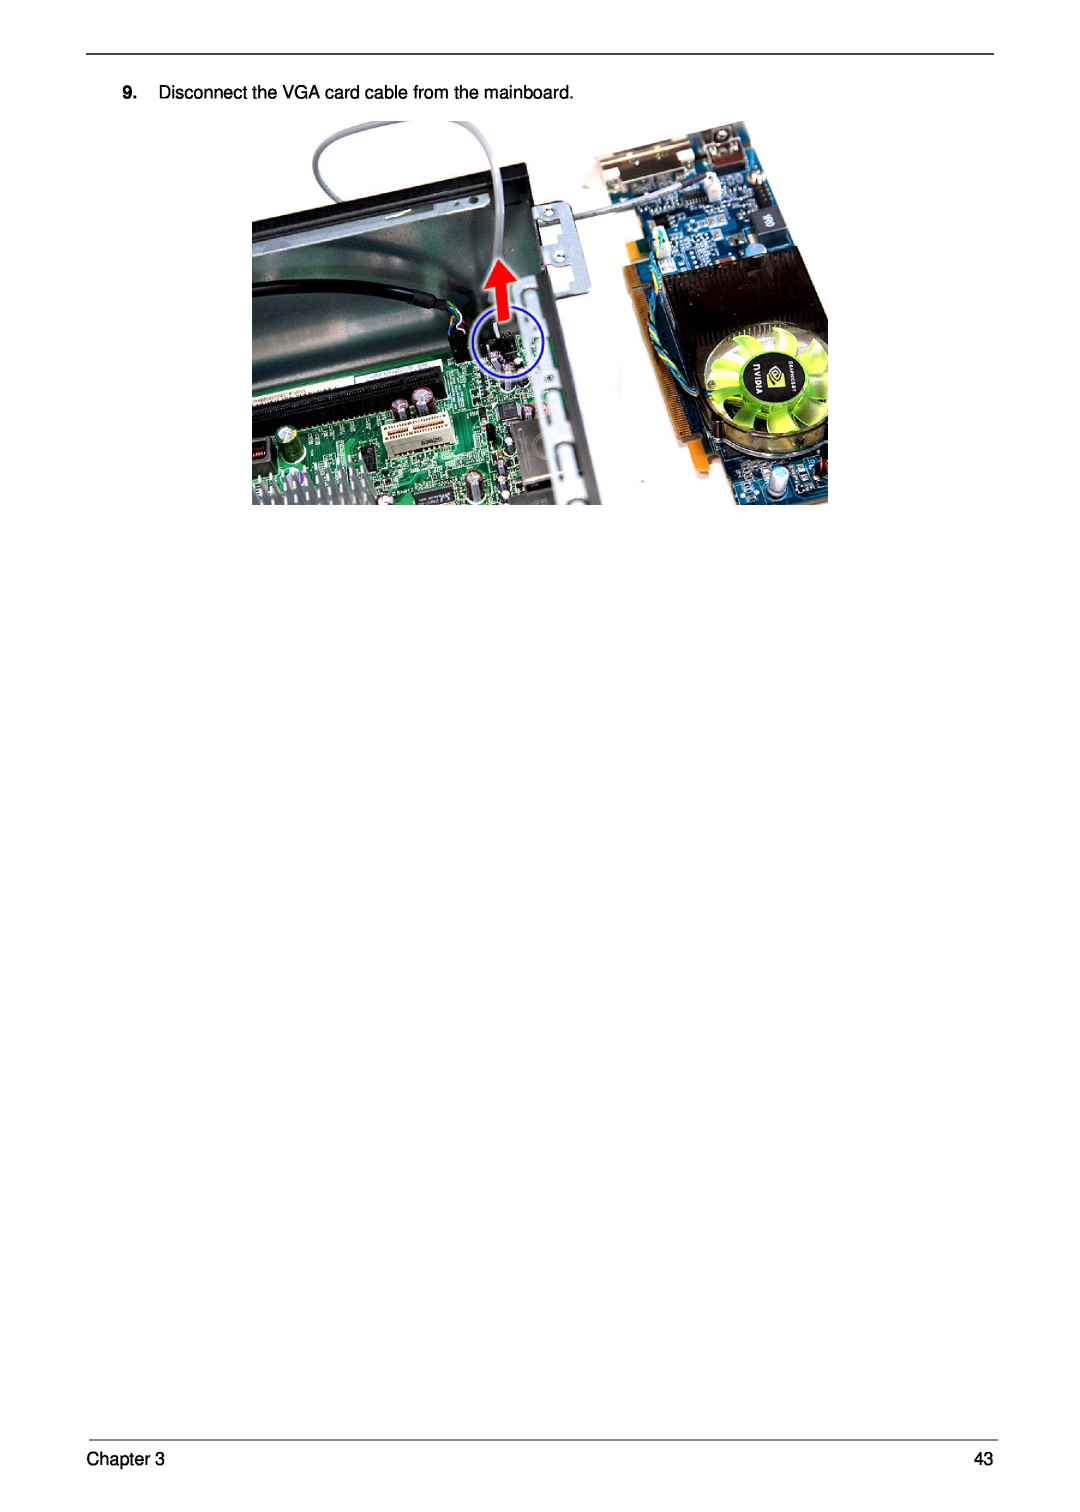 Acer X5812, X3812 manual Disconnect the VGA card cable from the mainboard, Chapter 